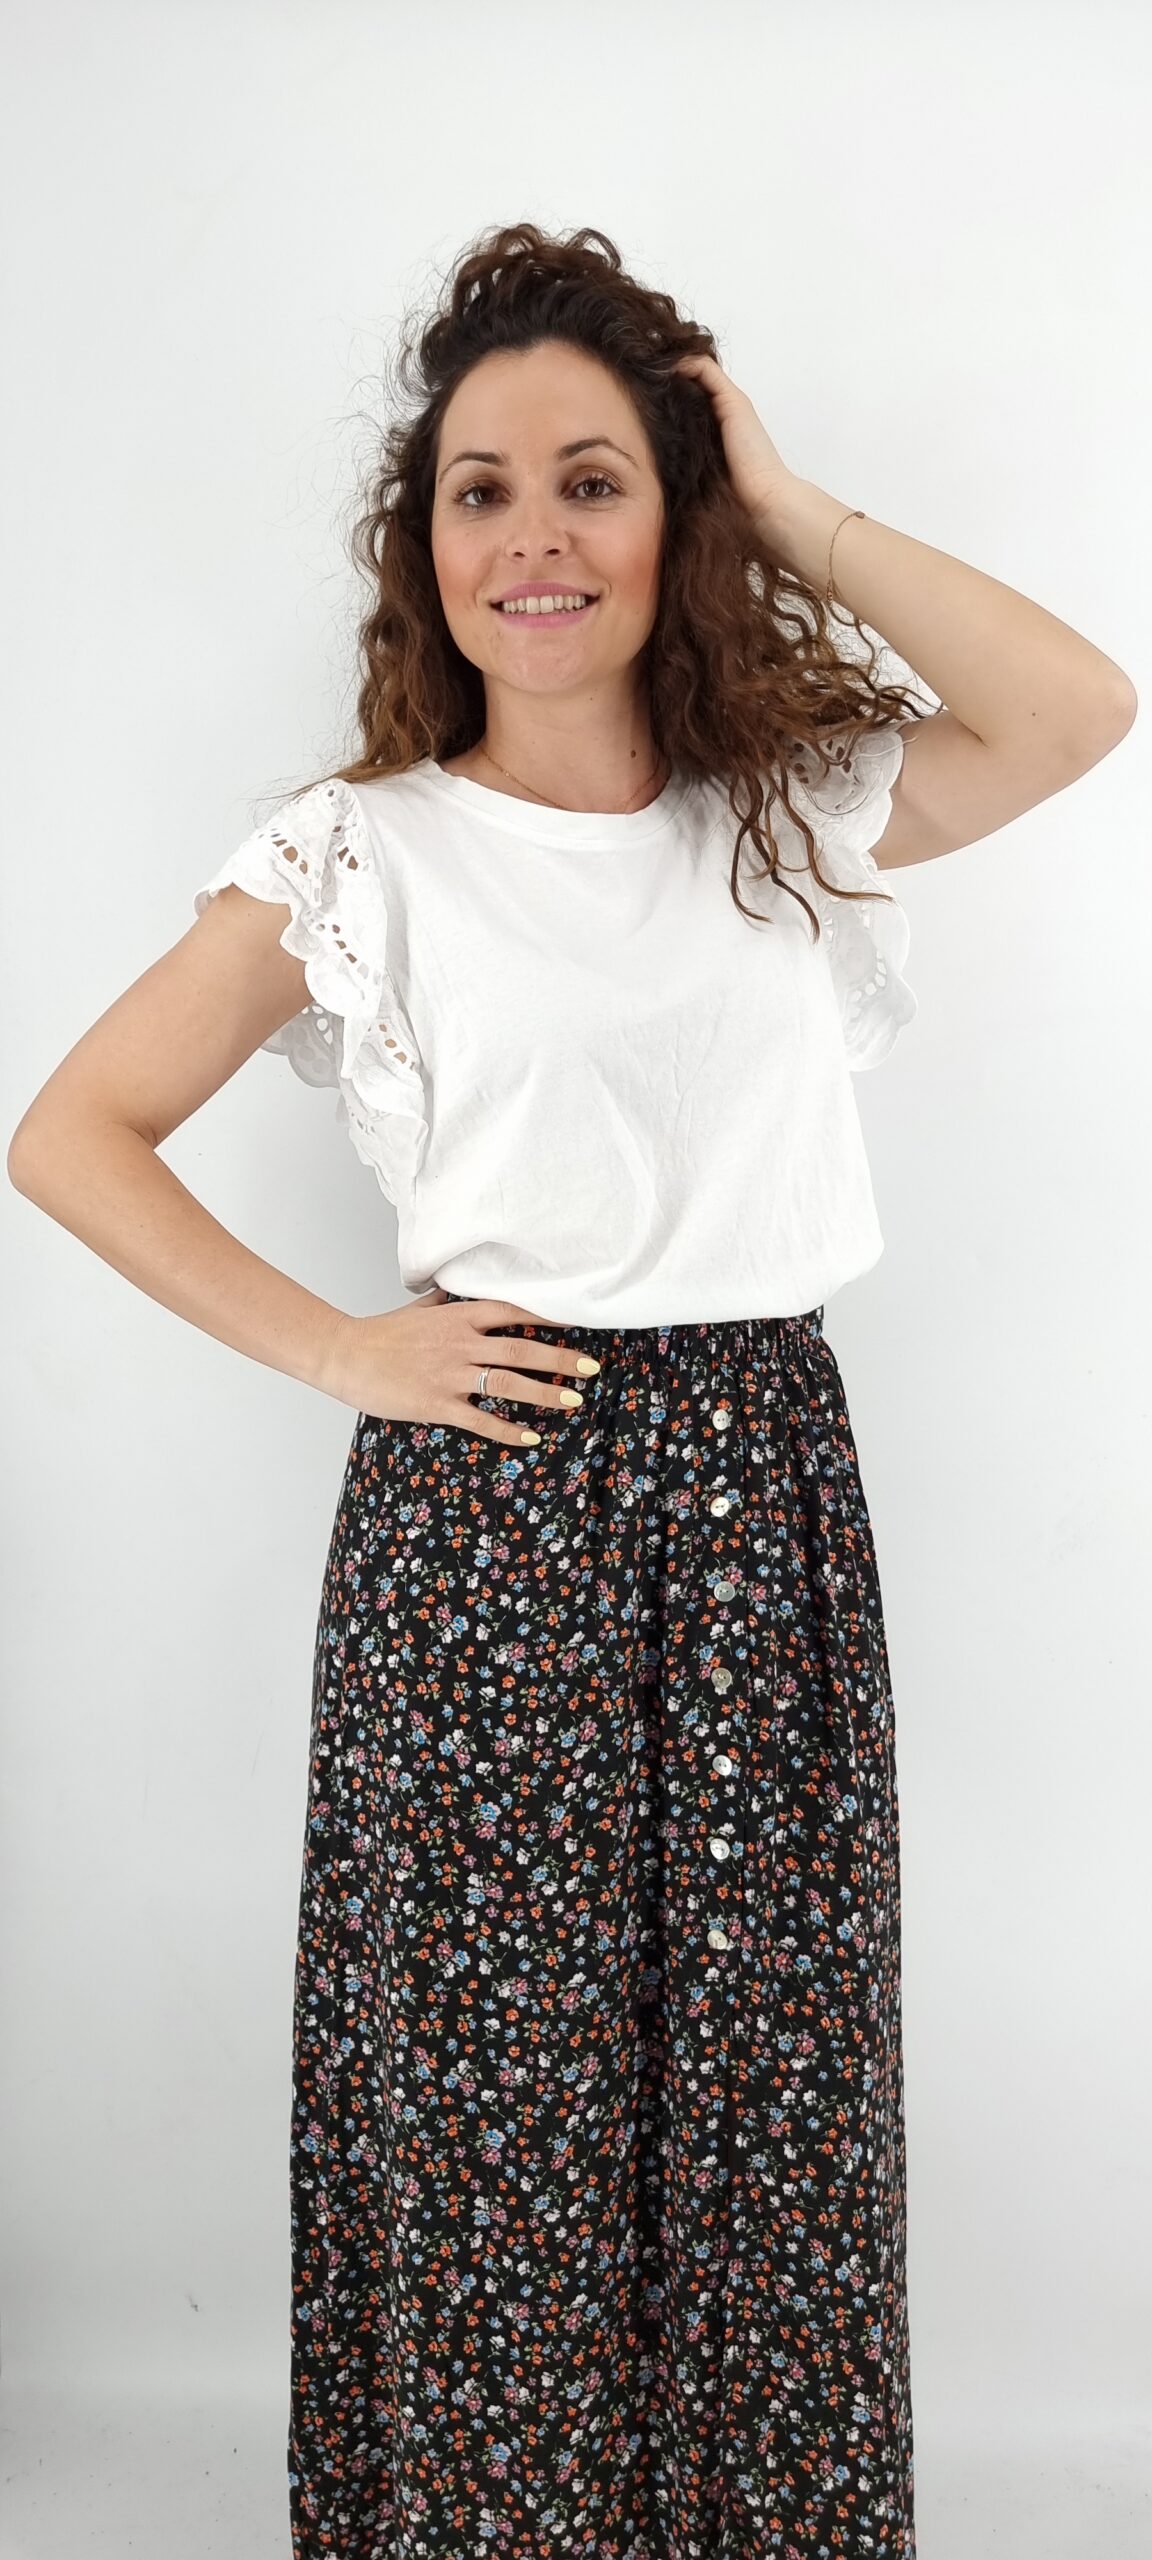 Long floral skirt with elastic in the middle and decorative buttons black